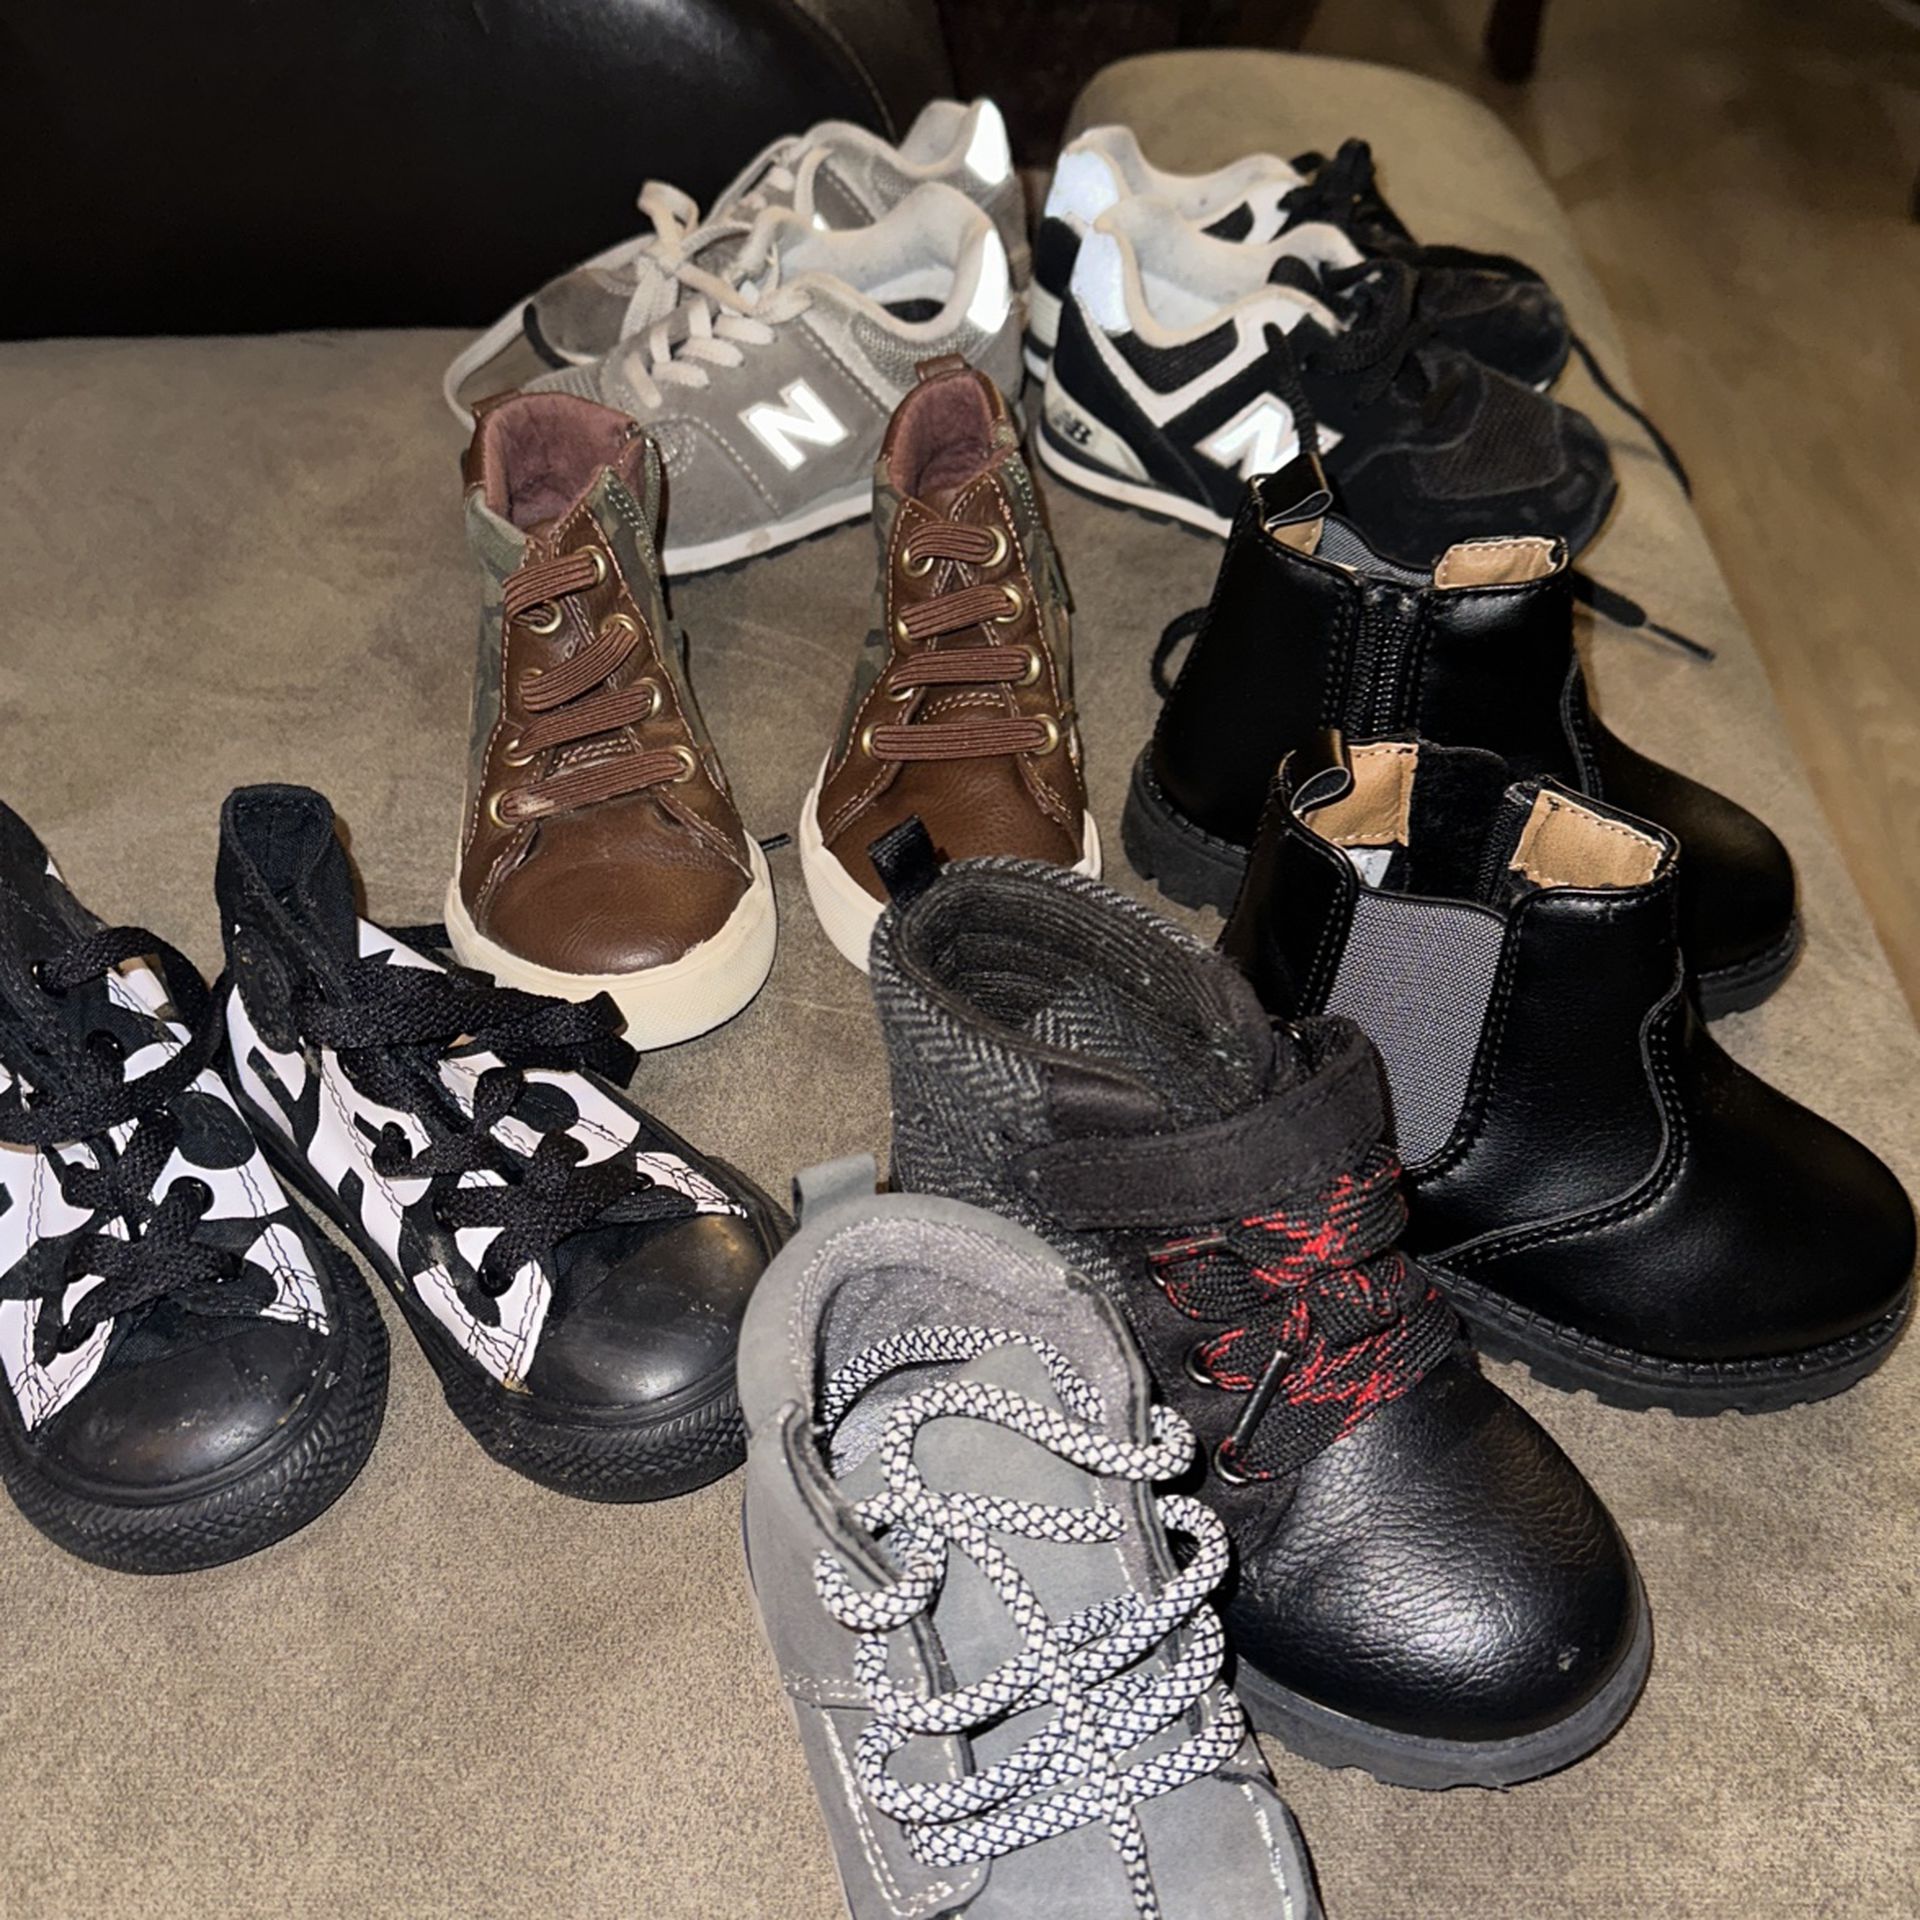 Baby Miscellaneous Shoes For Sale Make An Offer 